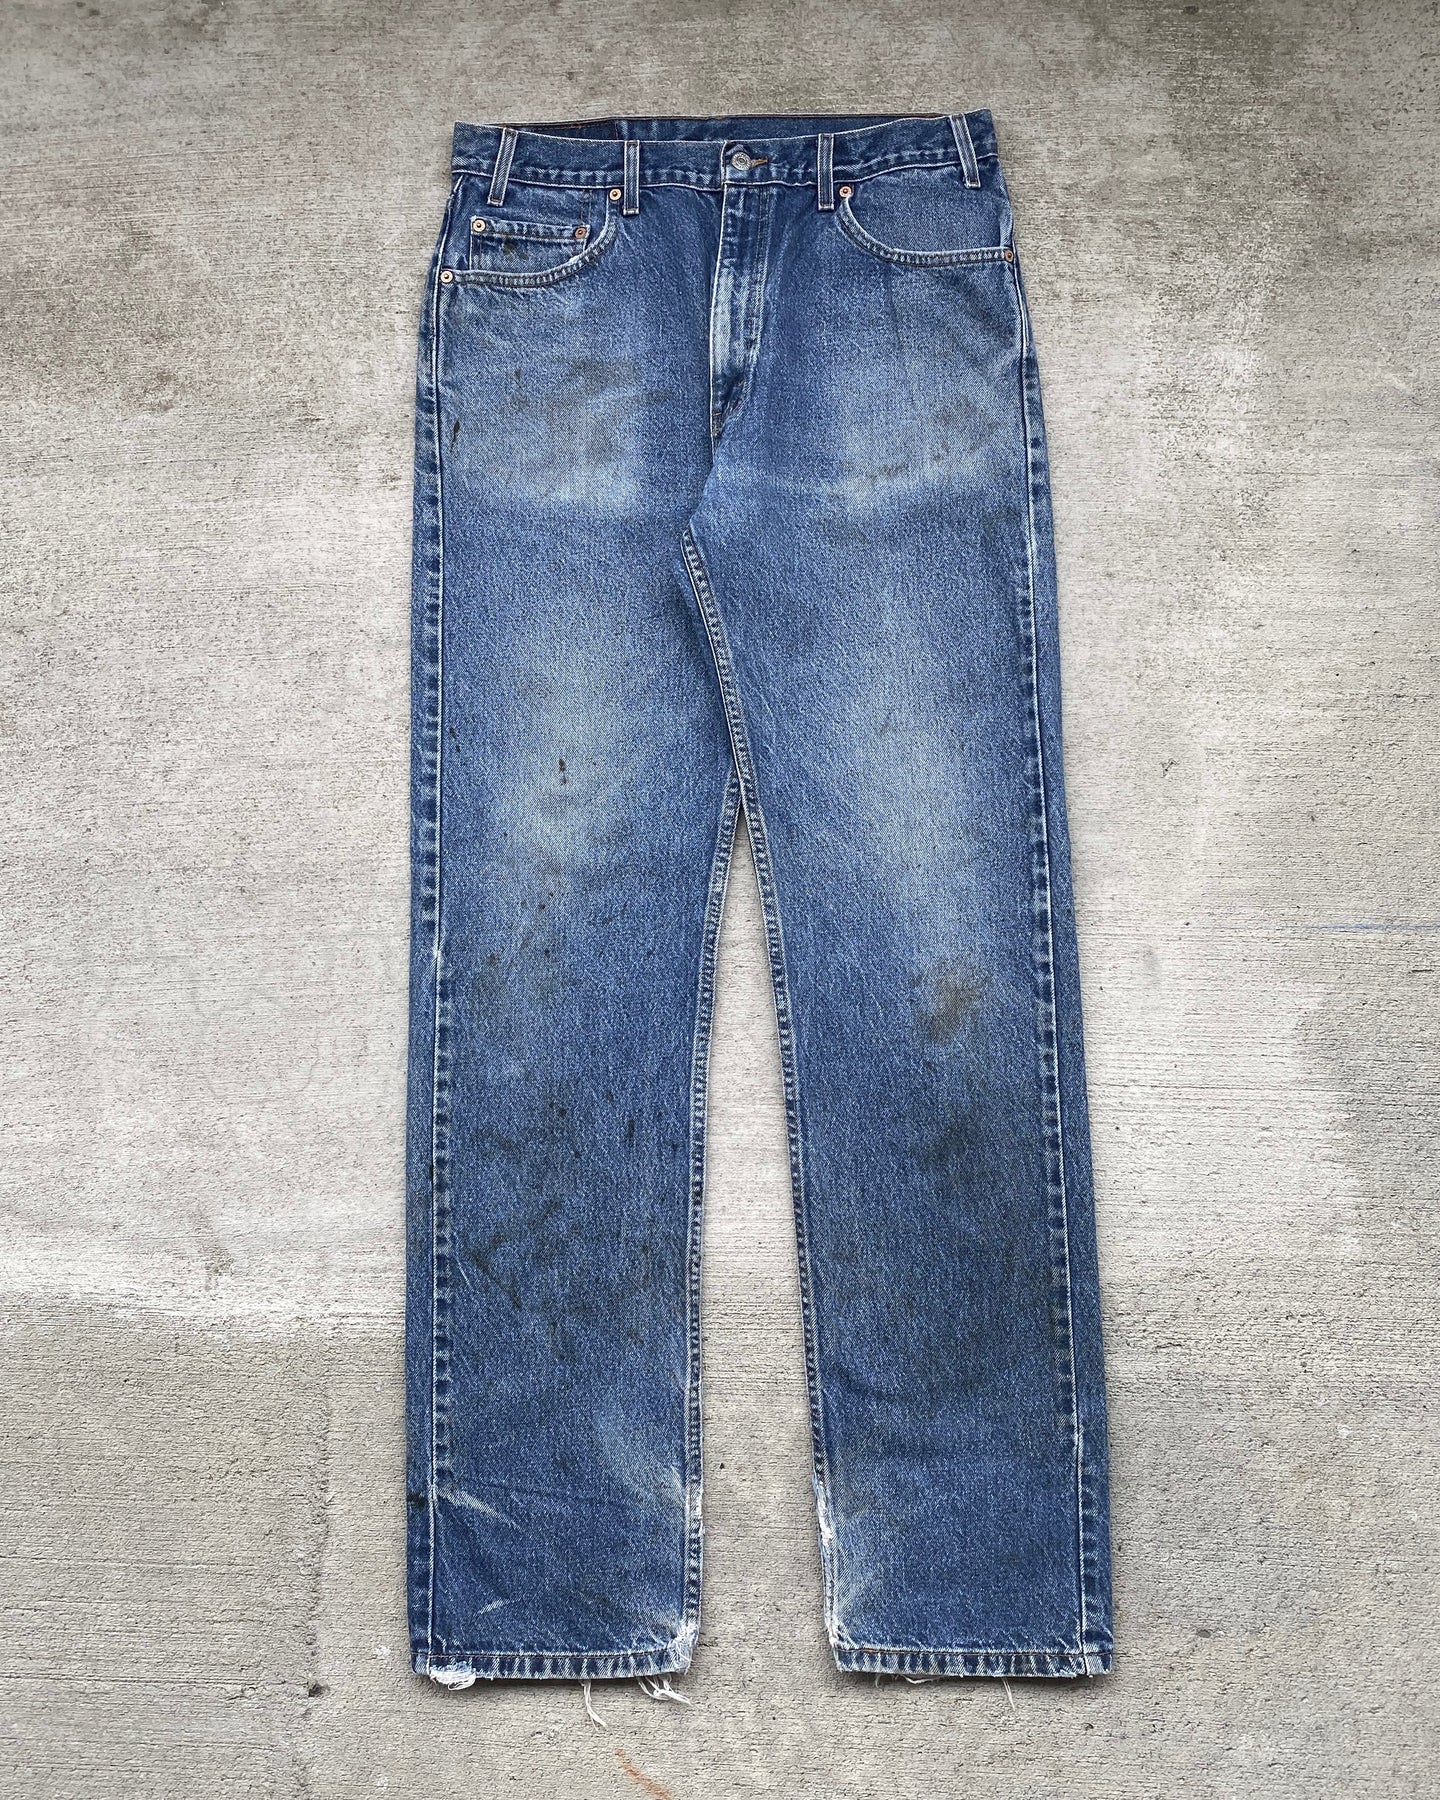 1990s Levi's Dirty Wash Well Worn 505 - Size 34 x 35